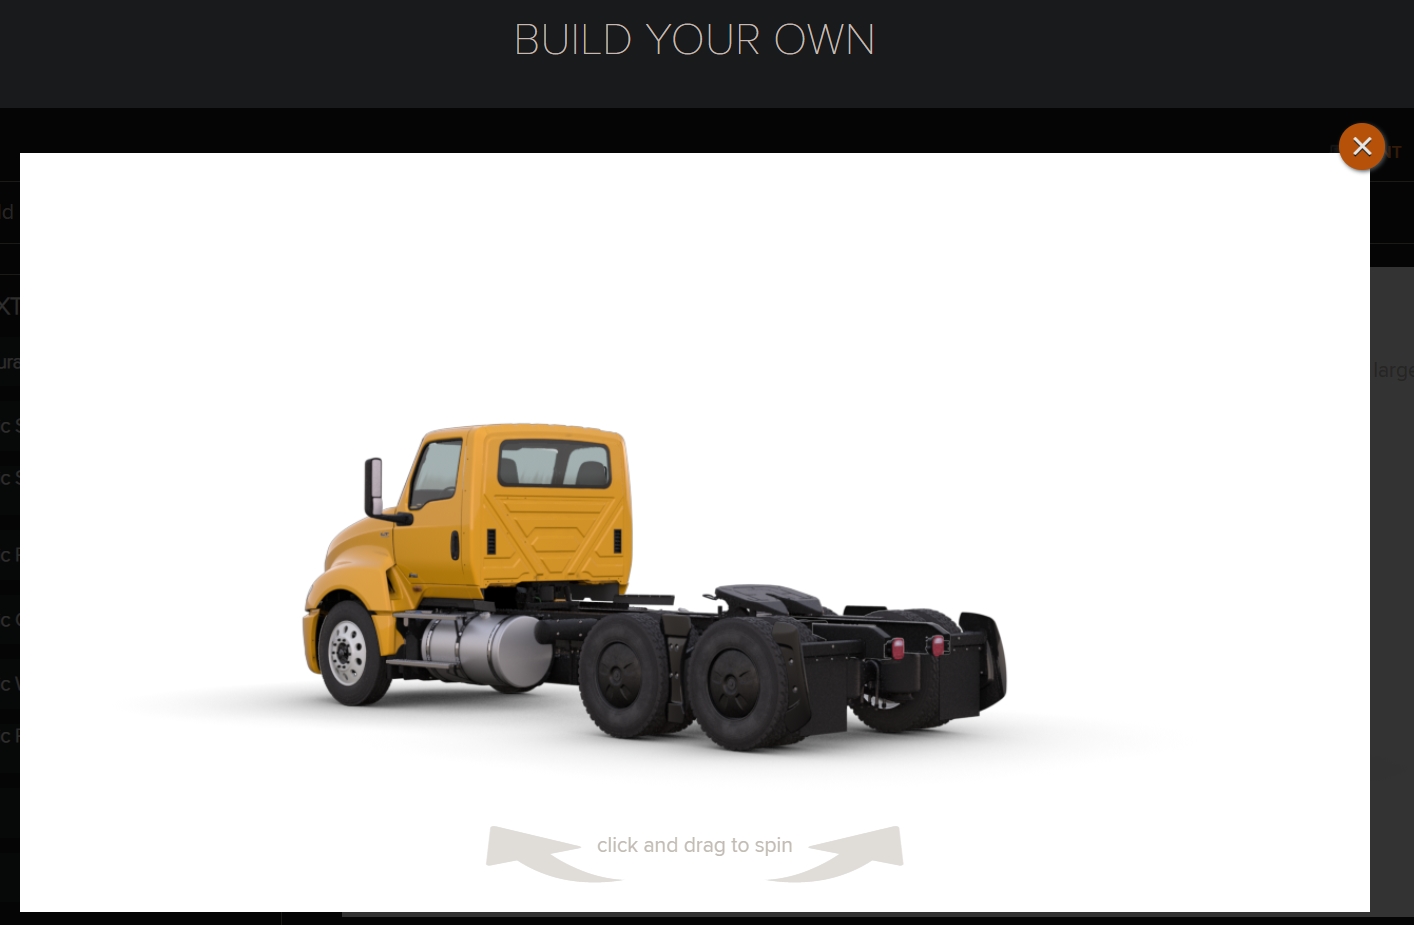 BUILD YOUR OWN.jpg